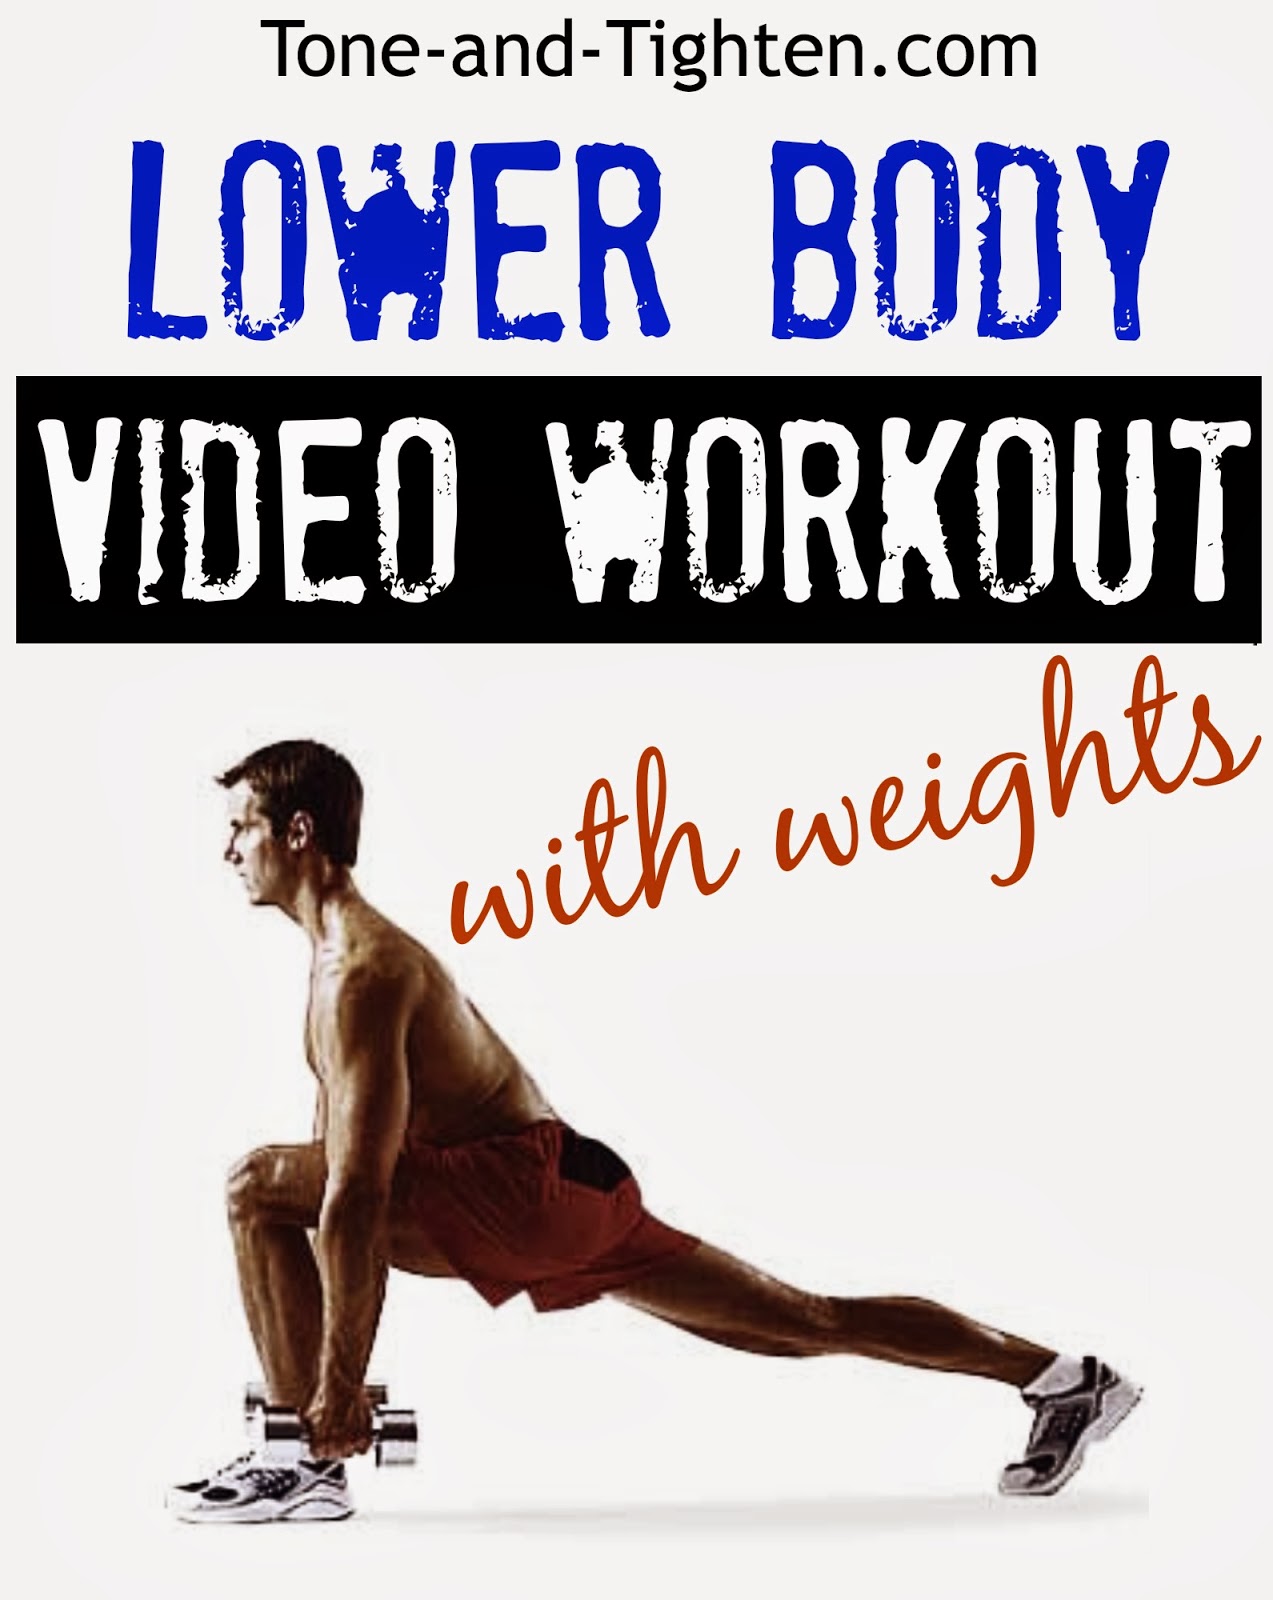 Lower body video workout with weights – Strength routine at it’s finest!